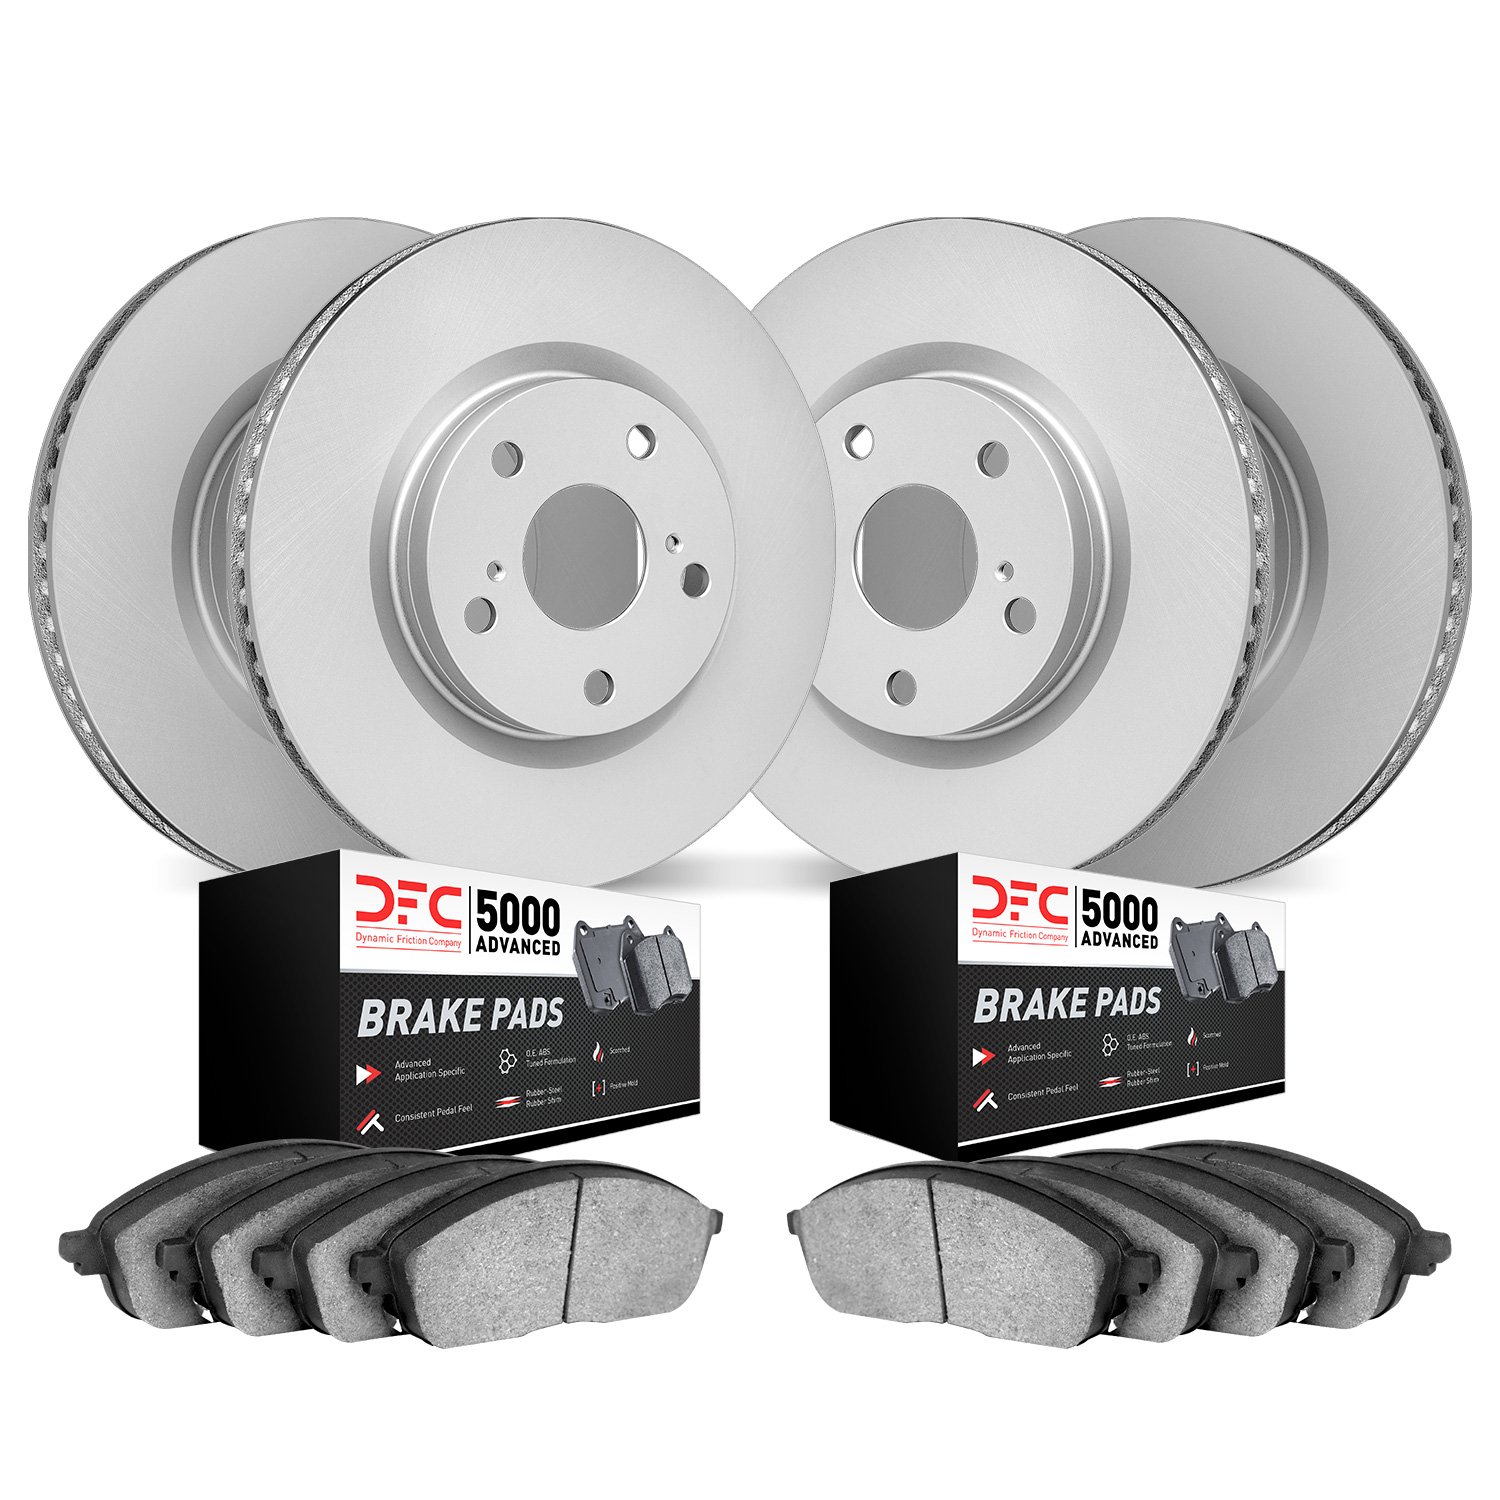 4504-46055 Geospec Brake Rotors w/5000 Advanced Brake Pads Kit, 2014-2019 GM, Position: Front and Rear